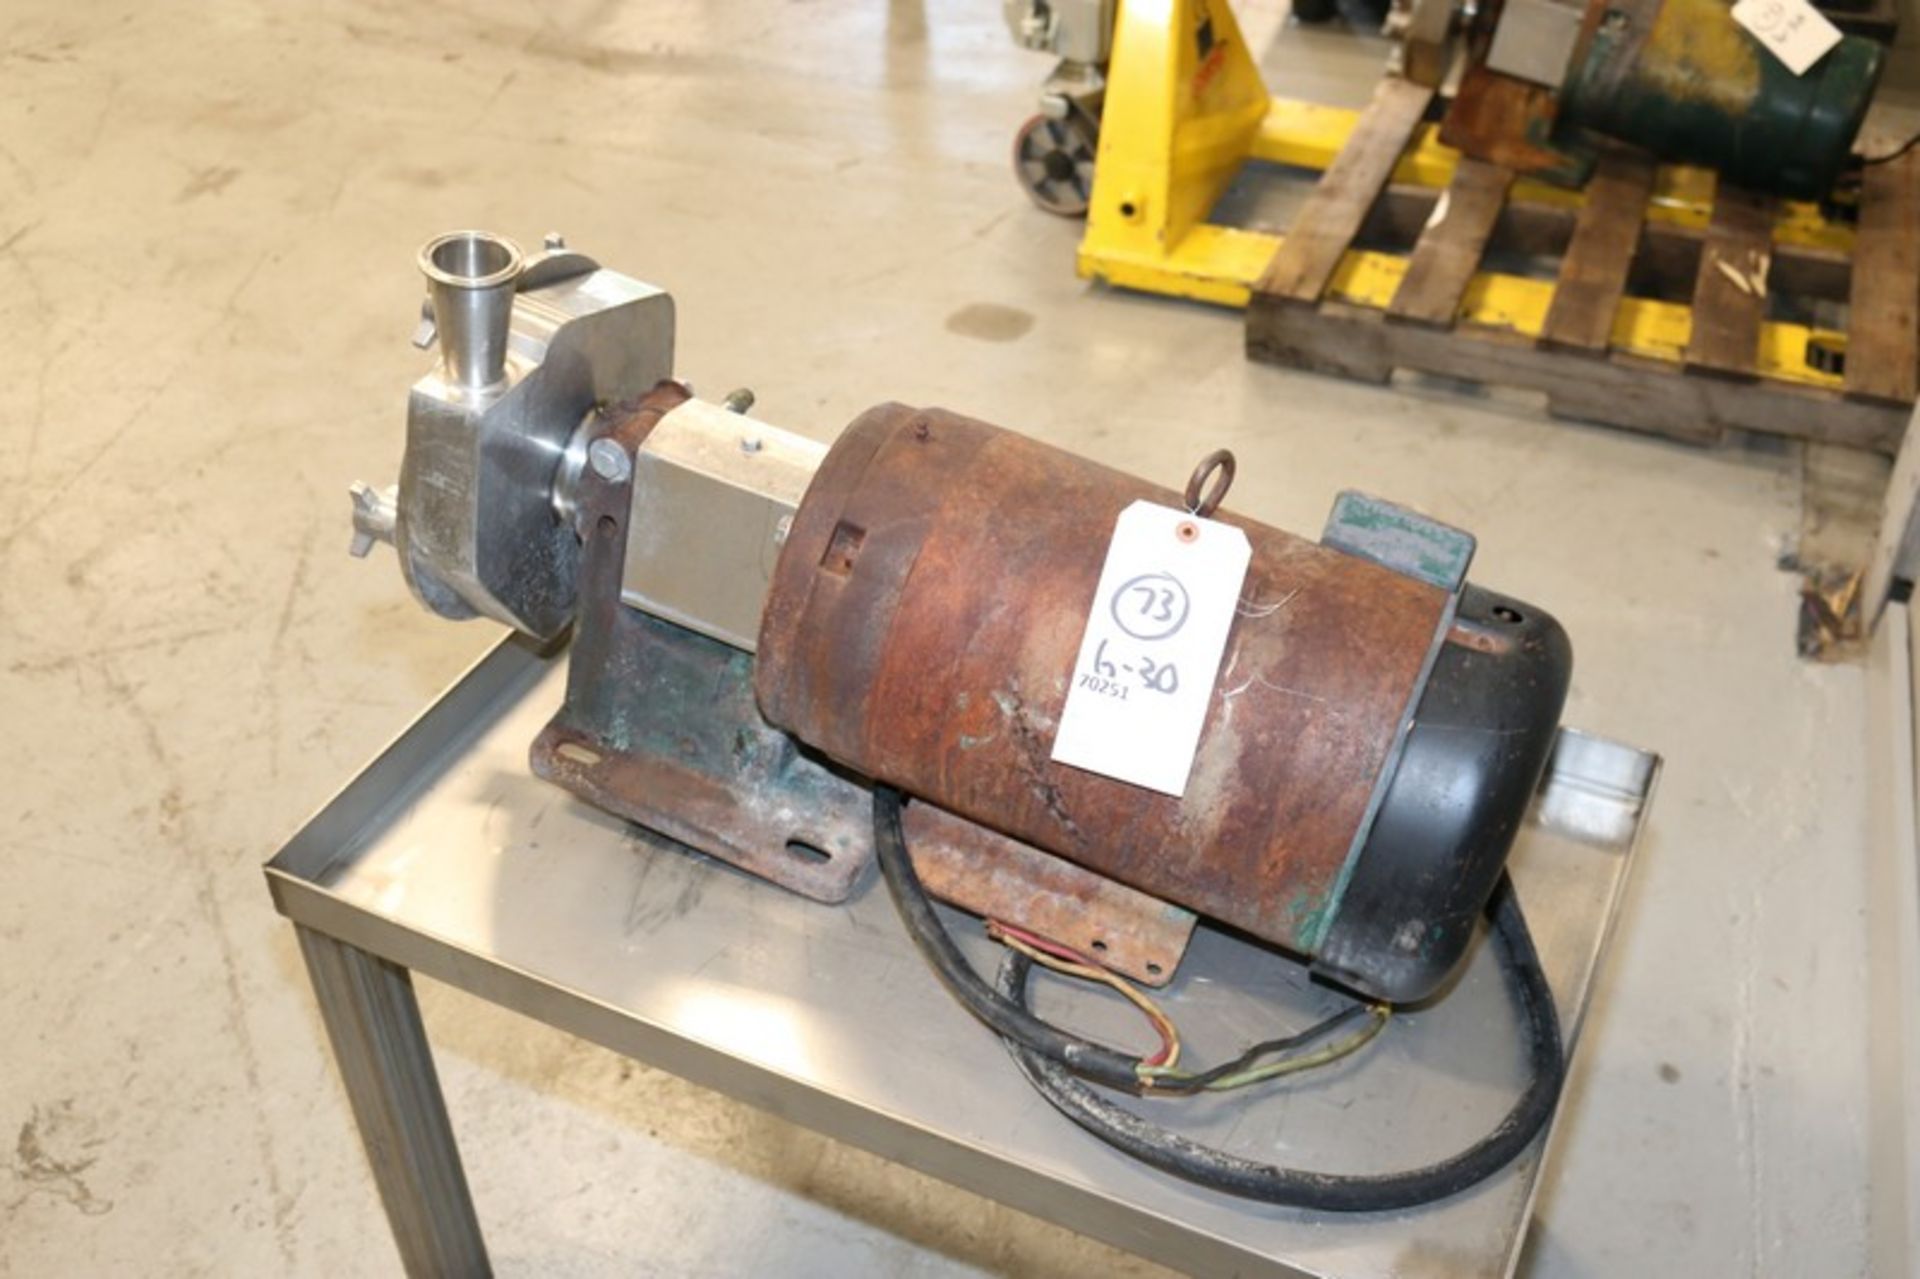 Fristam Aprox. 10 hp Centrifugal Pump, M/N FP1732-165, S/N FP175229739919, with Aprox. 2" x 3" Clamp - Image 3 of 6